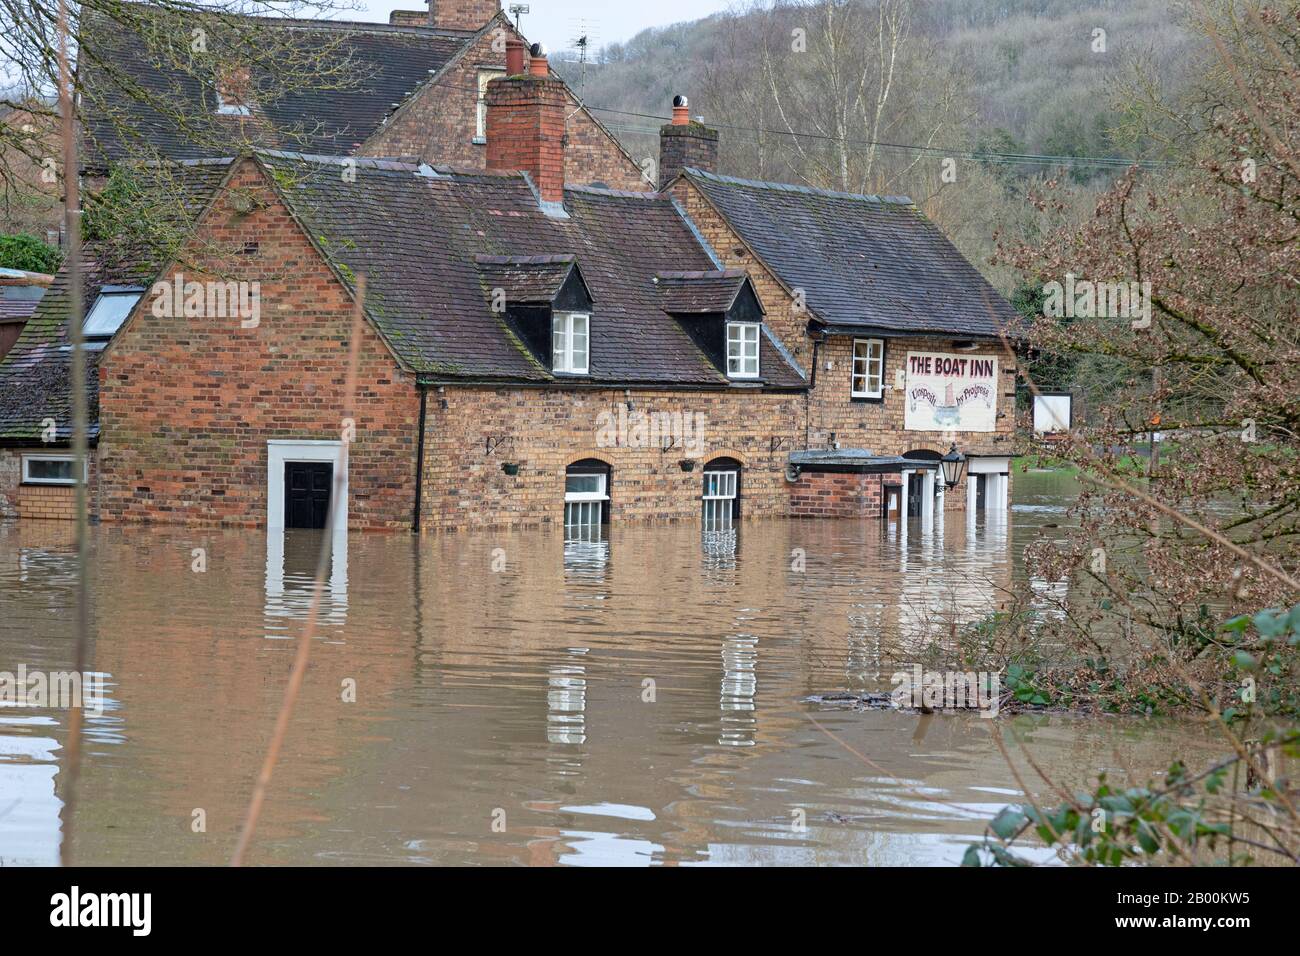 The Boat Inn, Jackfield, Shropshire, UK. 18th Feb 2020. As river levels continue to rise, the village of Jackfield in Shropshire, experiences its worst flooding in 20 years, as the River Severn bursts its banks, flooding houses and businesses. Credit: Rob Carter/Alamy Live News Stock Photo